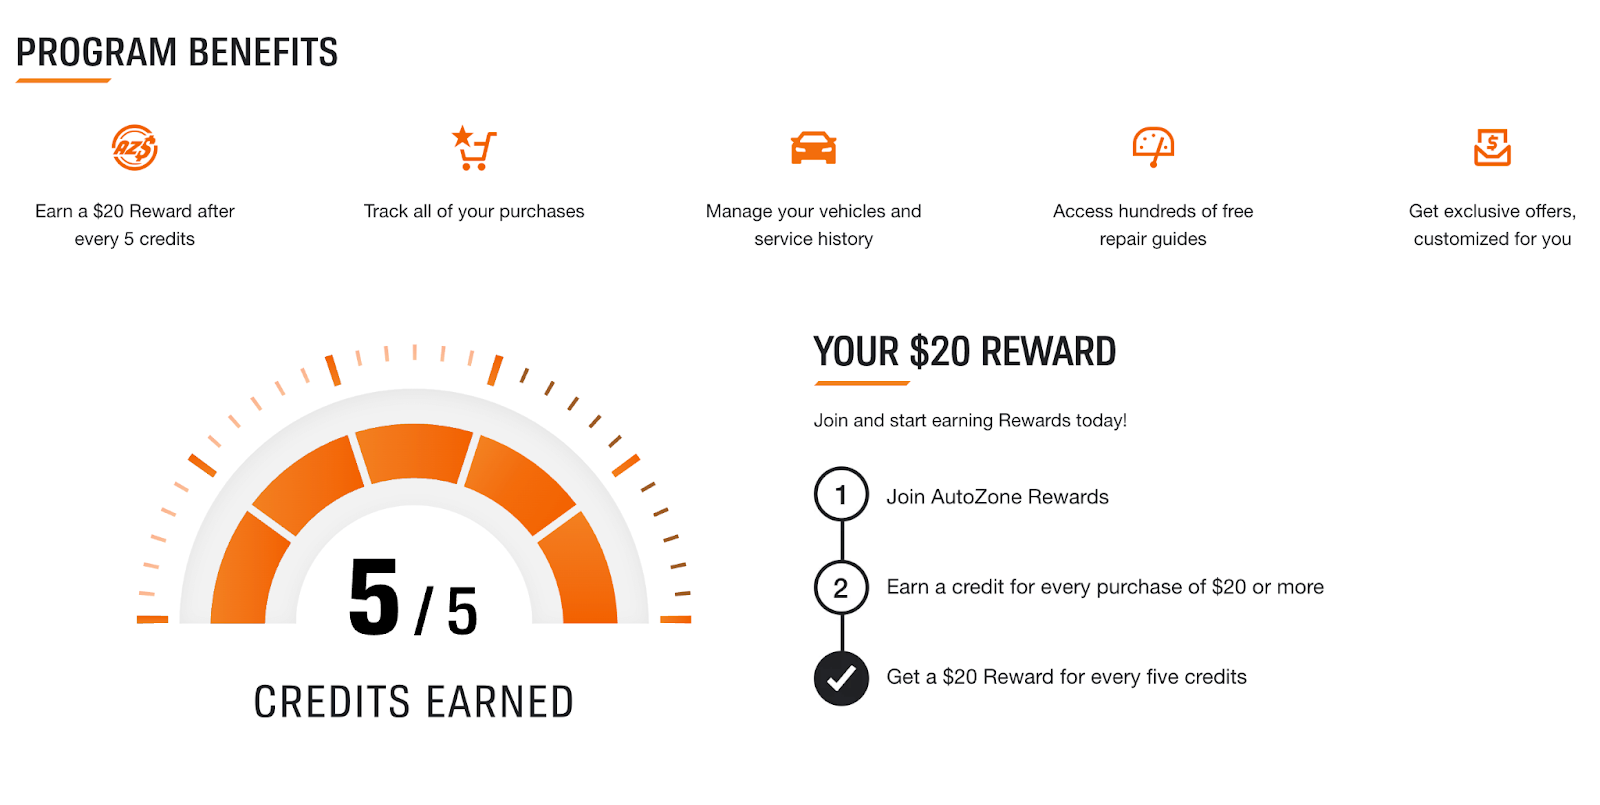  AutoZone Rewards Case Study–A screenshot from the AutoZone Rewards explainer page. The program benefits are listed: Earn a $20 reward after every 5 credits, track all of your purchases, manage your vehicle and service history, access hundreds of free repair guides, and get exclusive offers customized for you. Below that there is an orange meter illustration with ‘5.5 Credit Earned’ written below it in black, block letters. Beside the meter is text that says, “Your $20 Reward. Join and start earning Rewards today! 1. Join AutoZone Rewards 2. Earn a credit for every purchase of $20 or more 3. Get a $20 reward for every five credits.”  